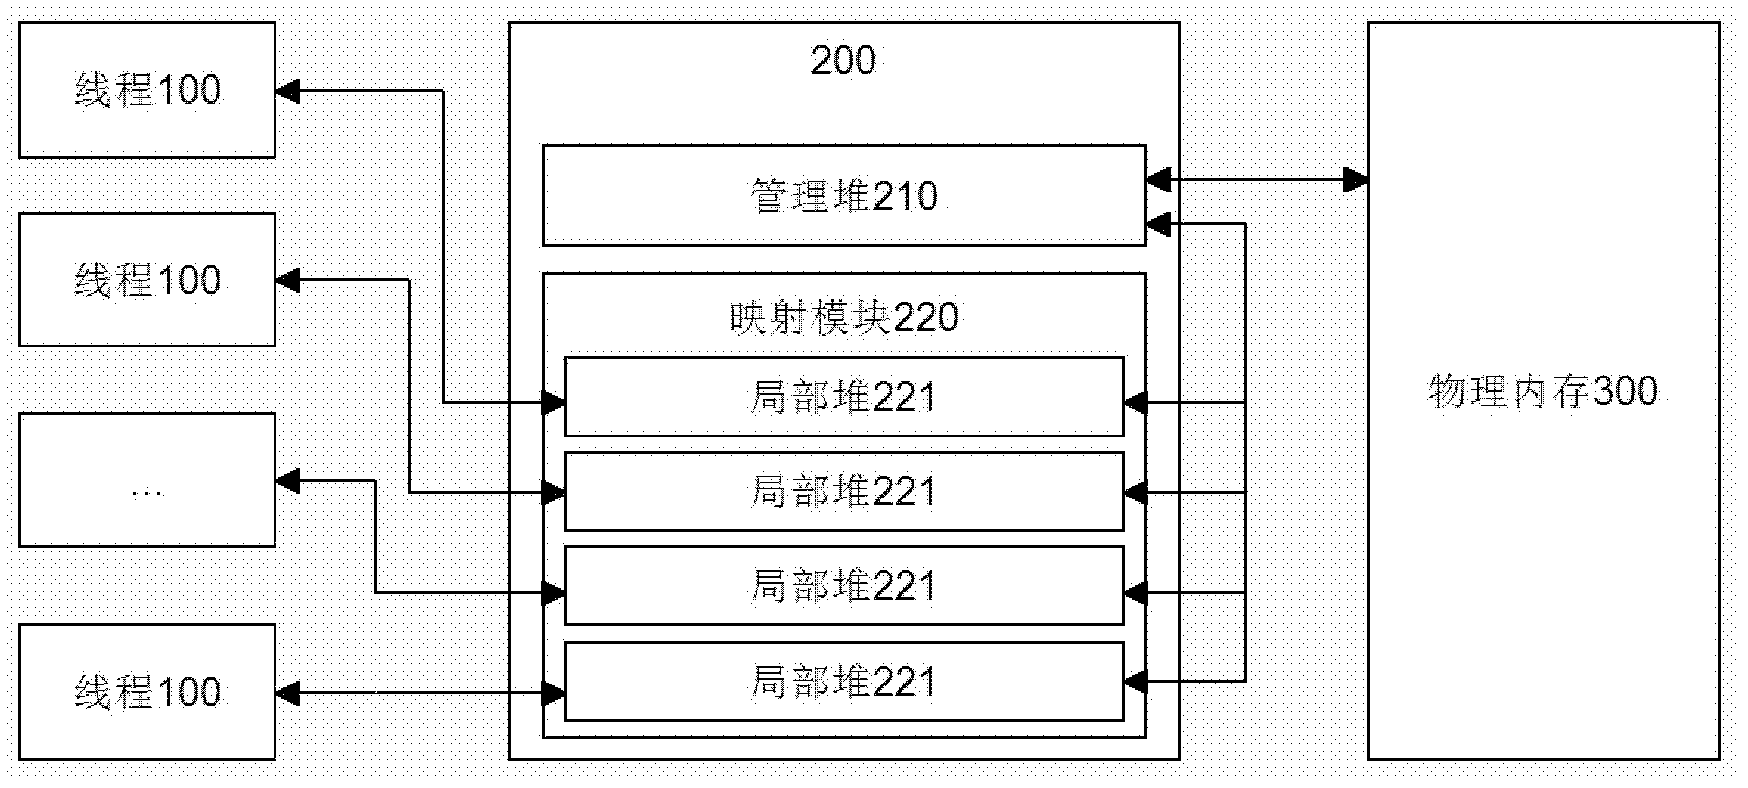 Highly-concurrent real-time memory resource management and scheduling method